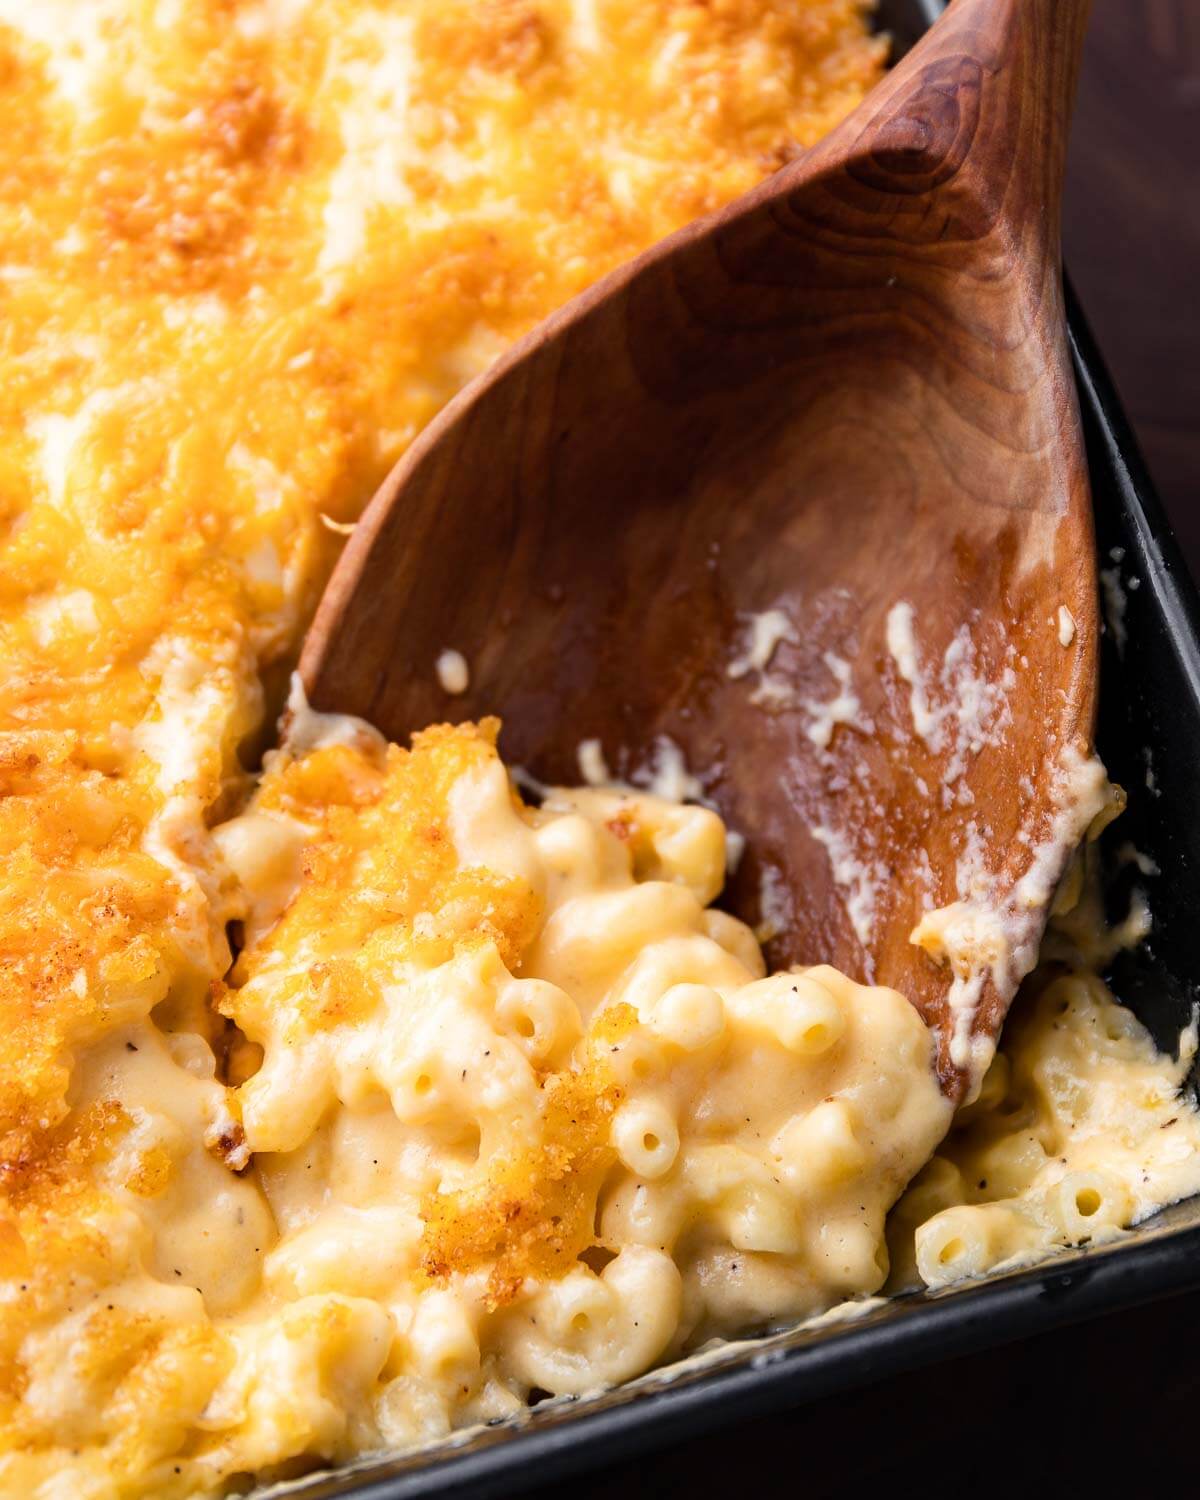 Large wooden spoon in in baking dish with baked mac and cheese.